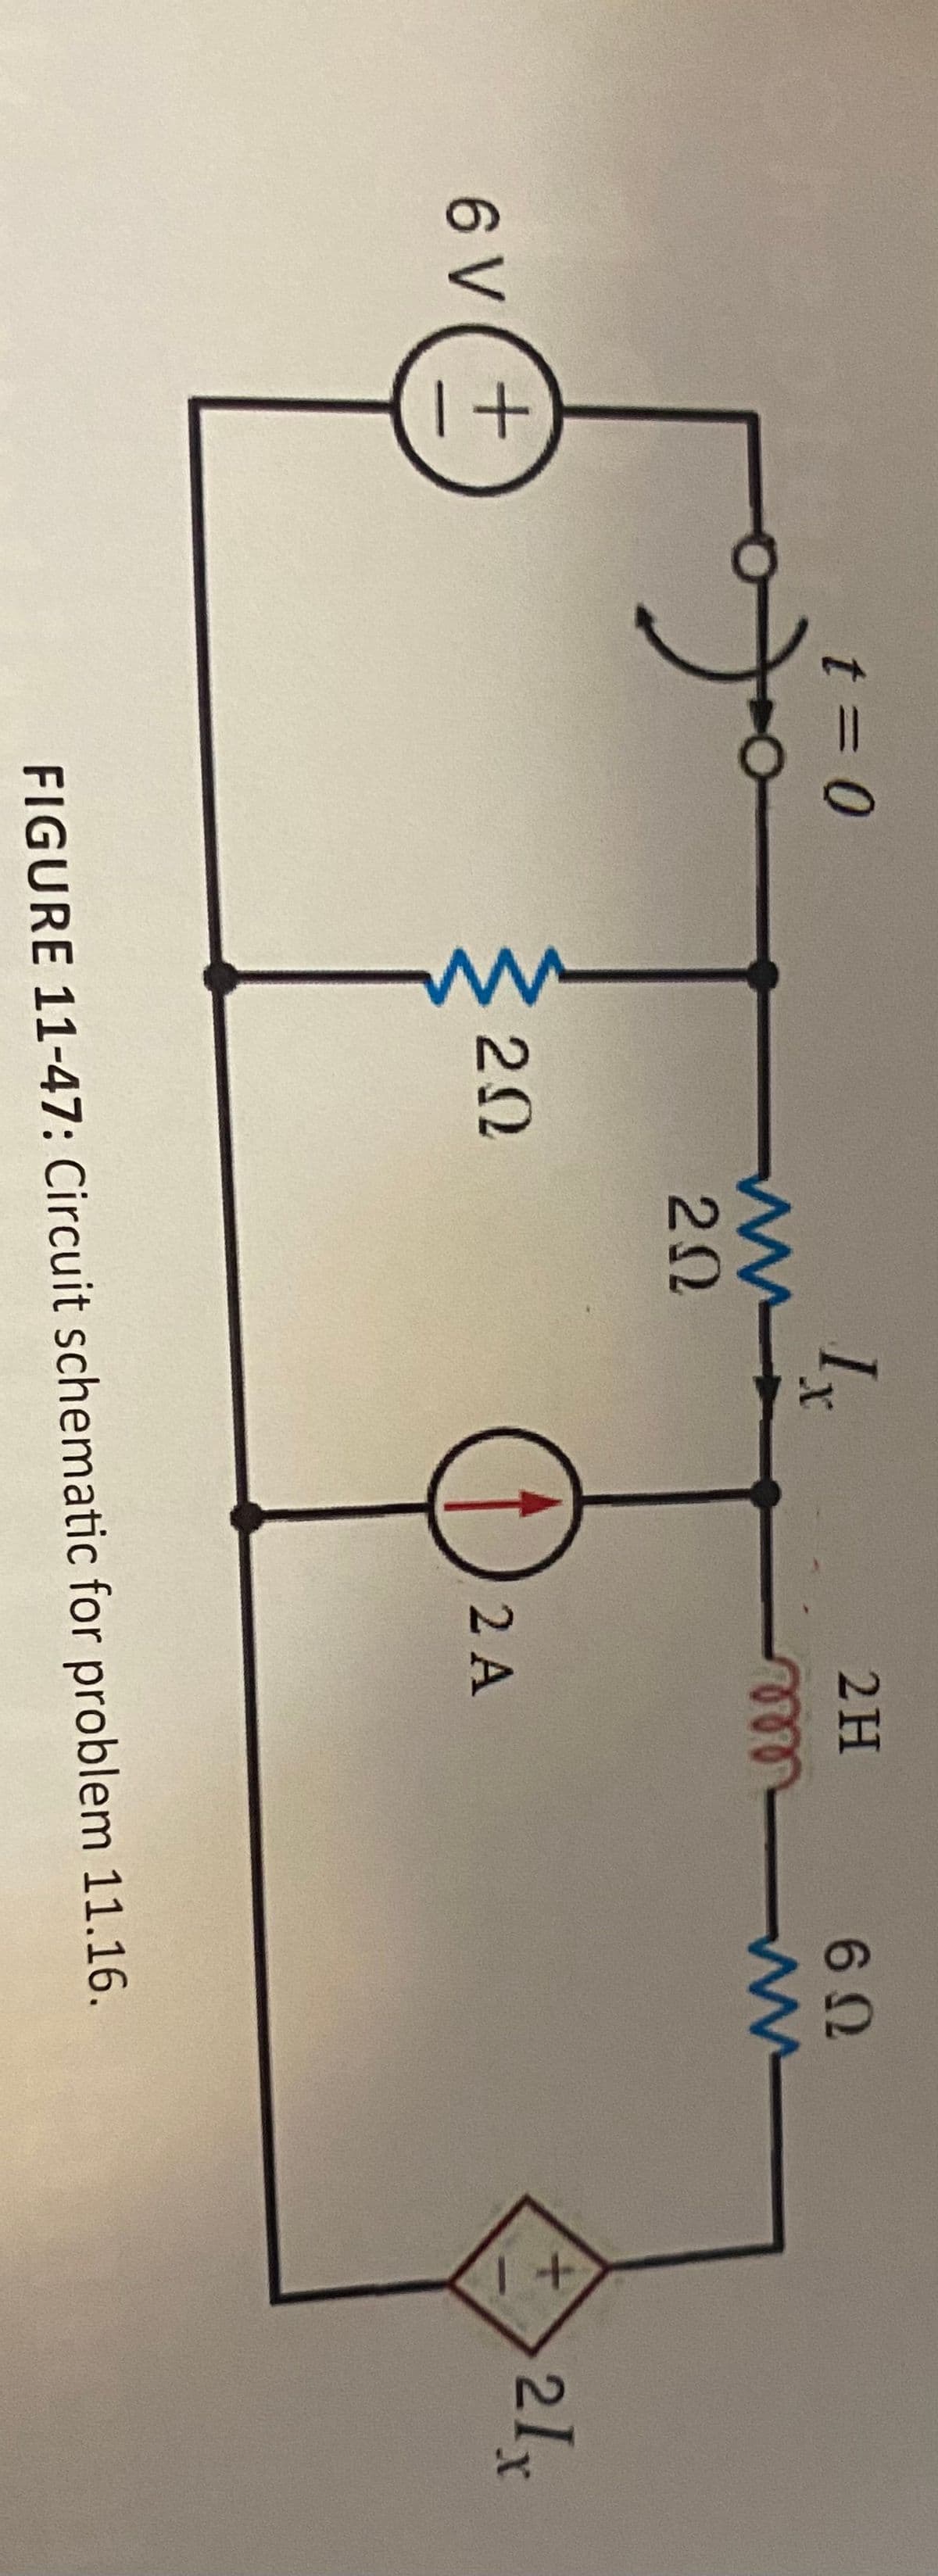 t = 0
2H
62
ll
20
6 V
3 20
21x
2 A
FIGURE 11-47: Circuit schematic for problem 11.16.
